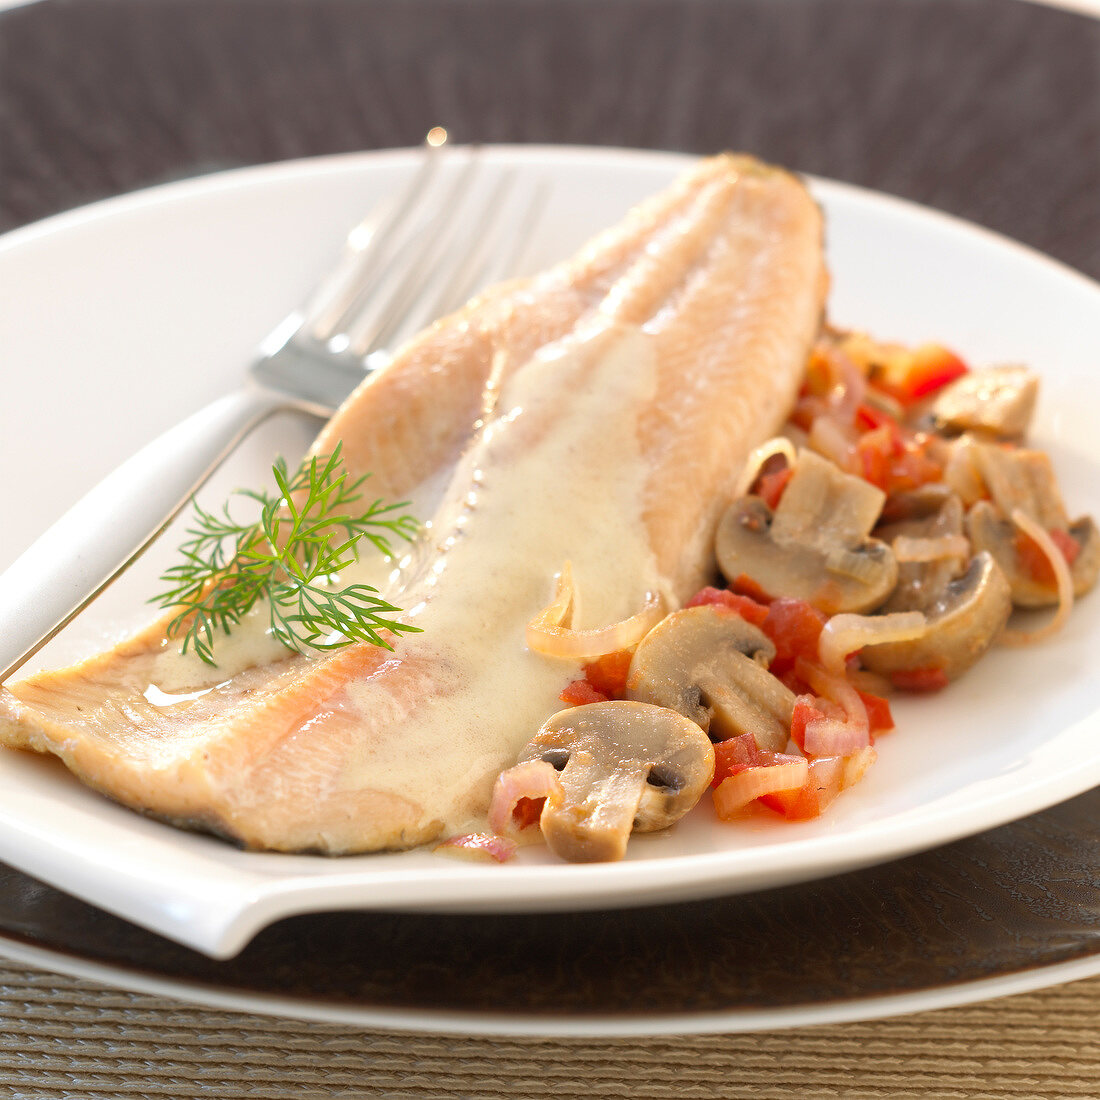 Fillet of trout with creamy sauce,mushrooms,tomatoes and onions